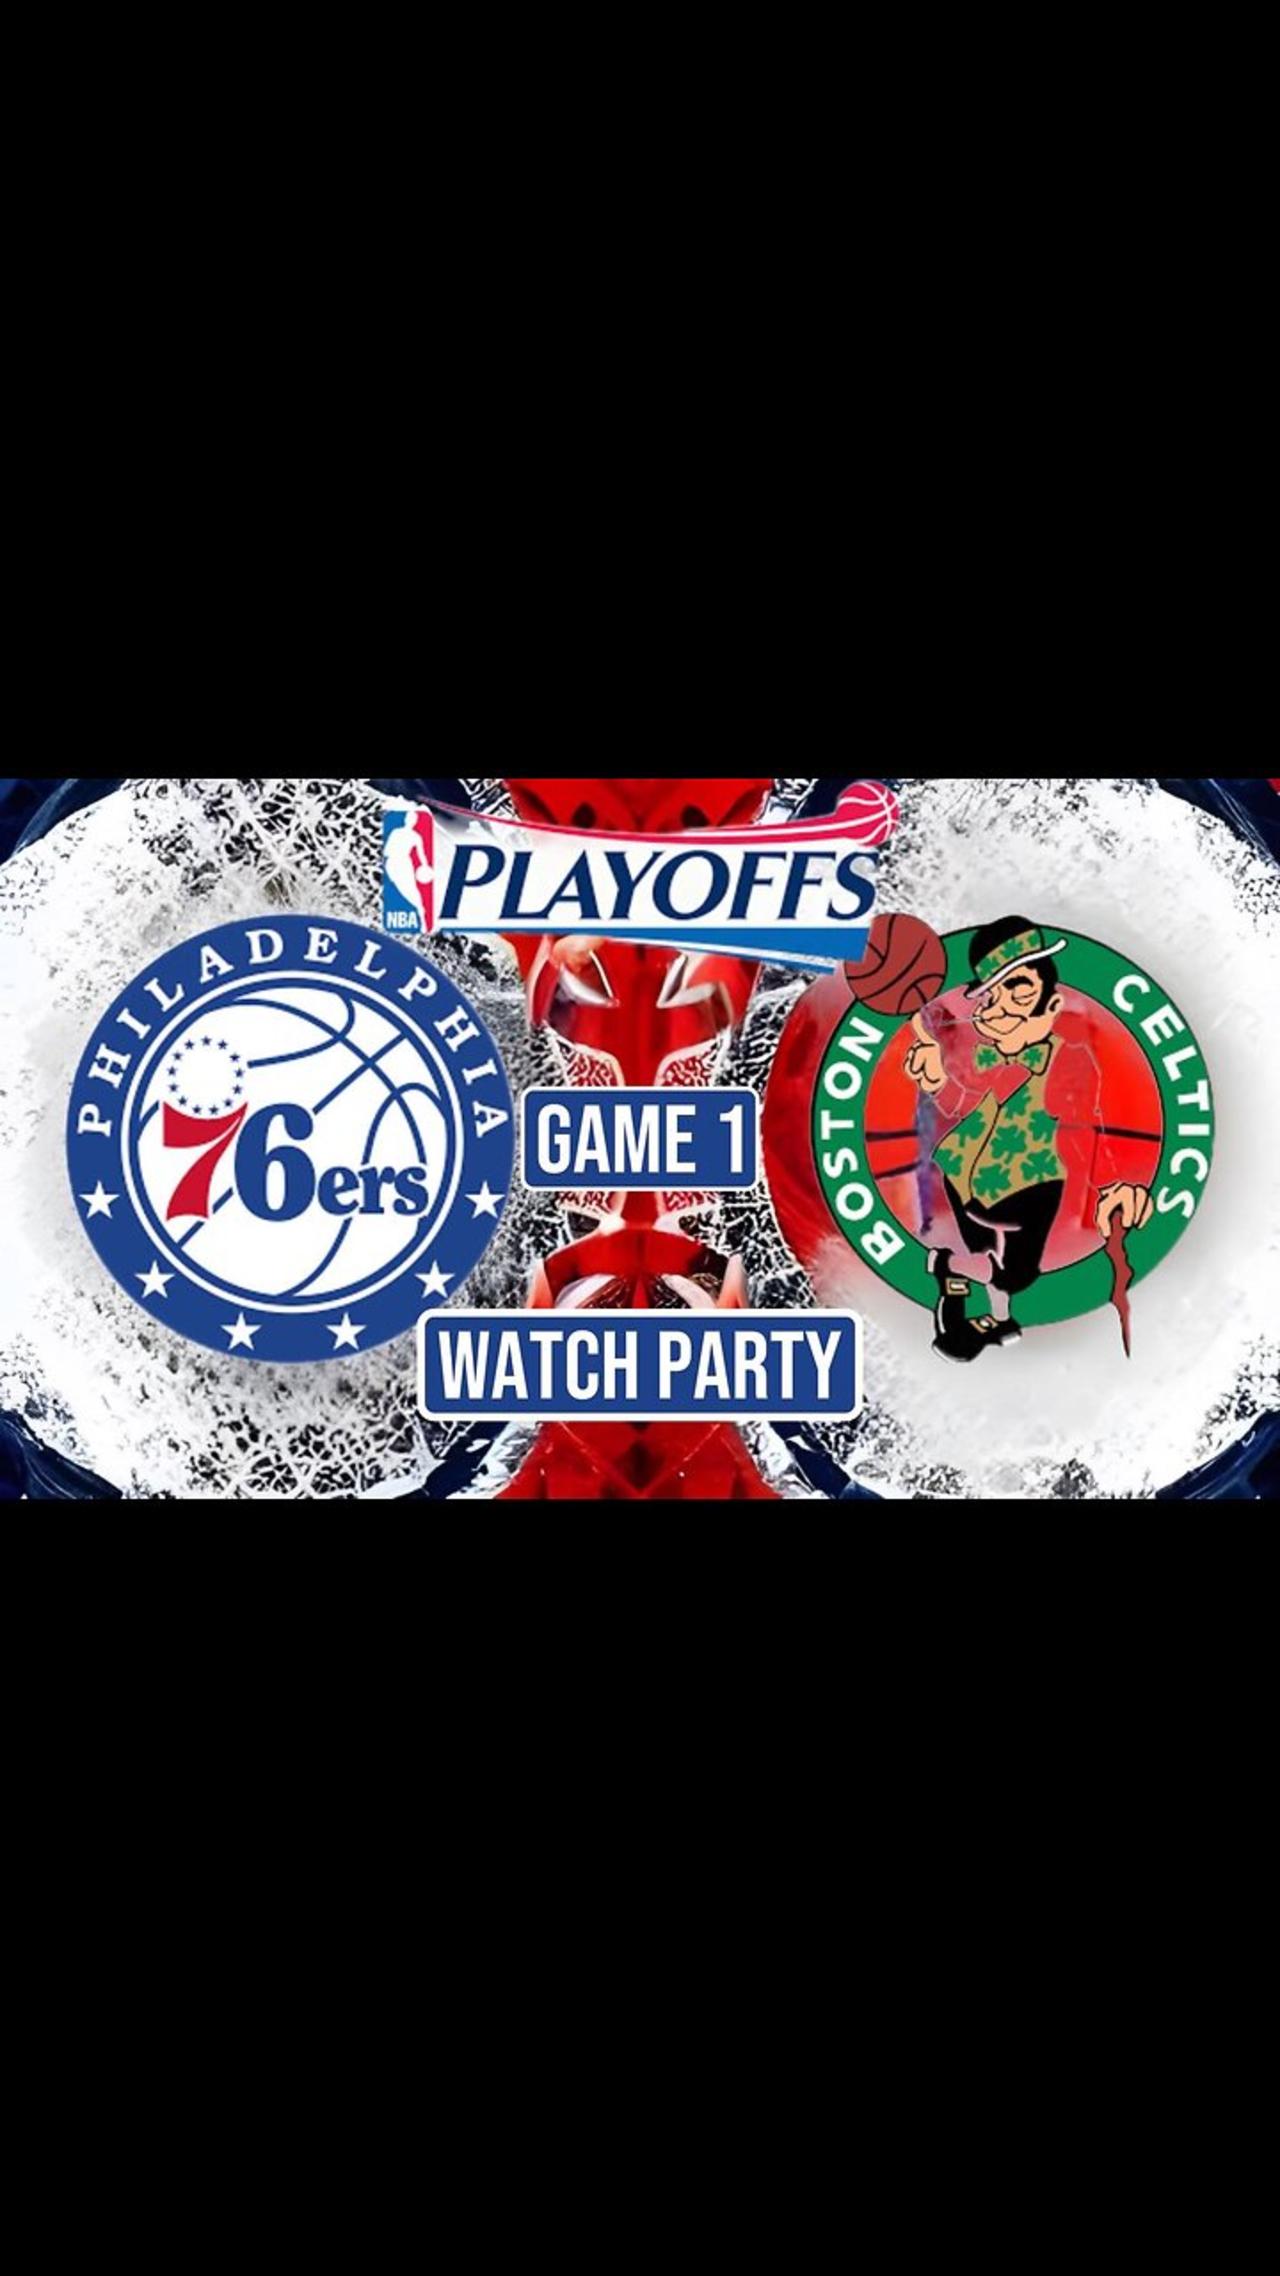 Join The Excitement: Philadelphia 76ers vs Boston Celtics game 1 RD2 Live Watch Party